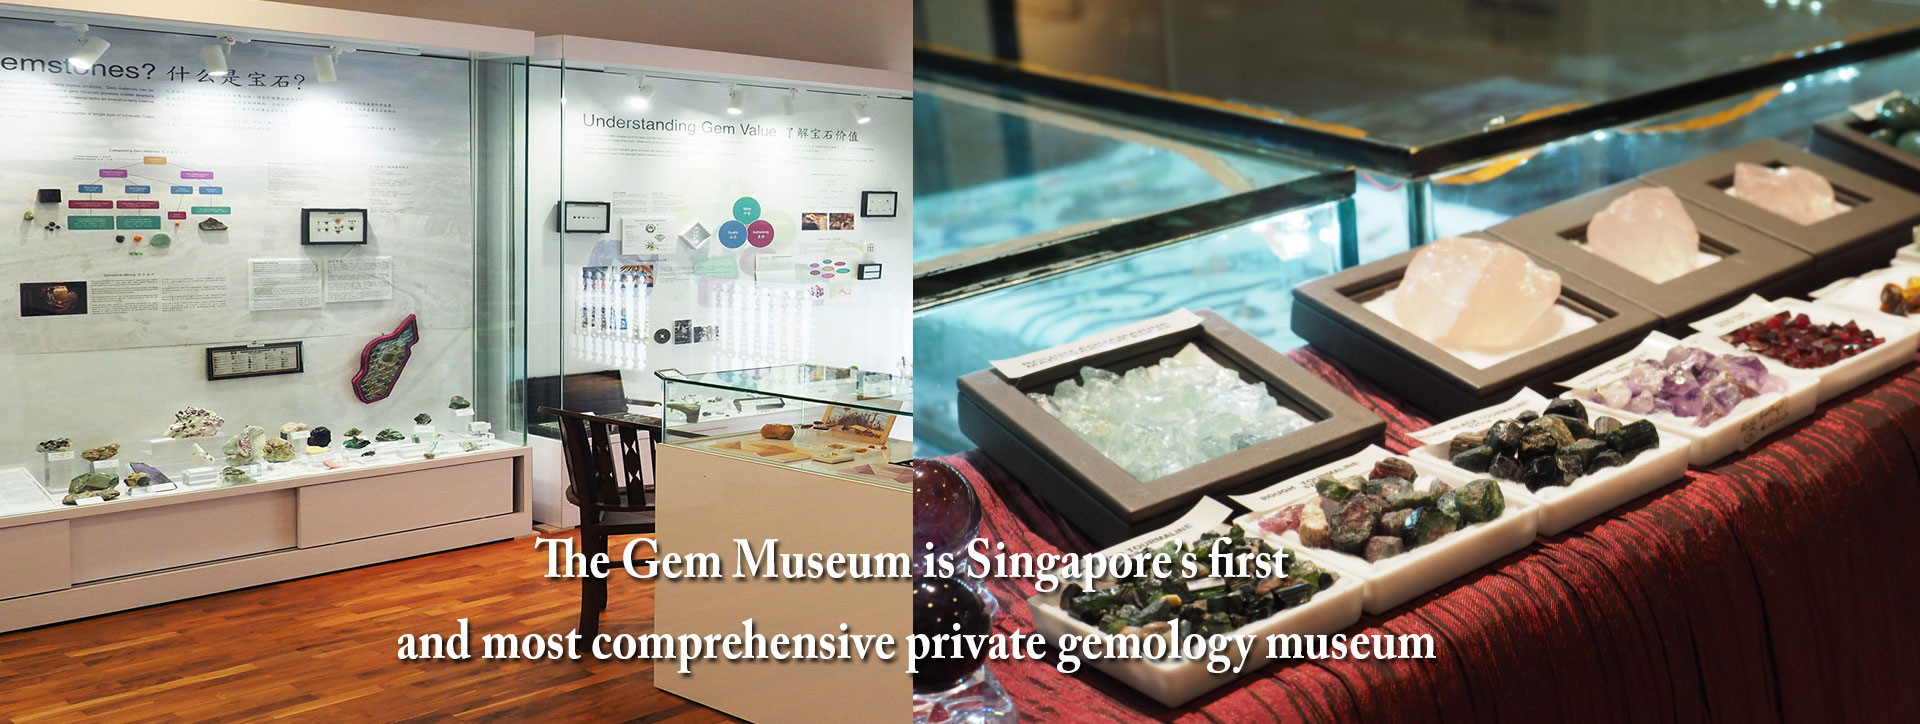 7-minute drive from Gems Ville to The Gem Museum - Singapore's first and most comprehensive private gem museum